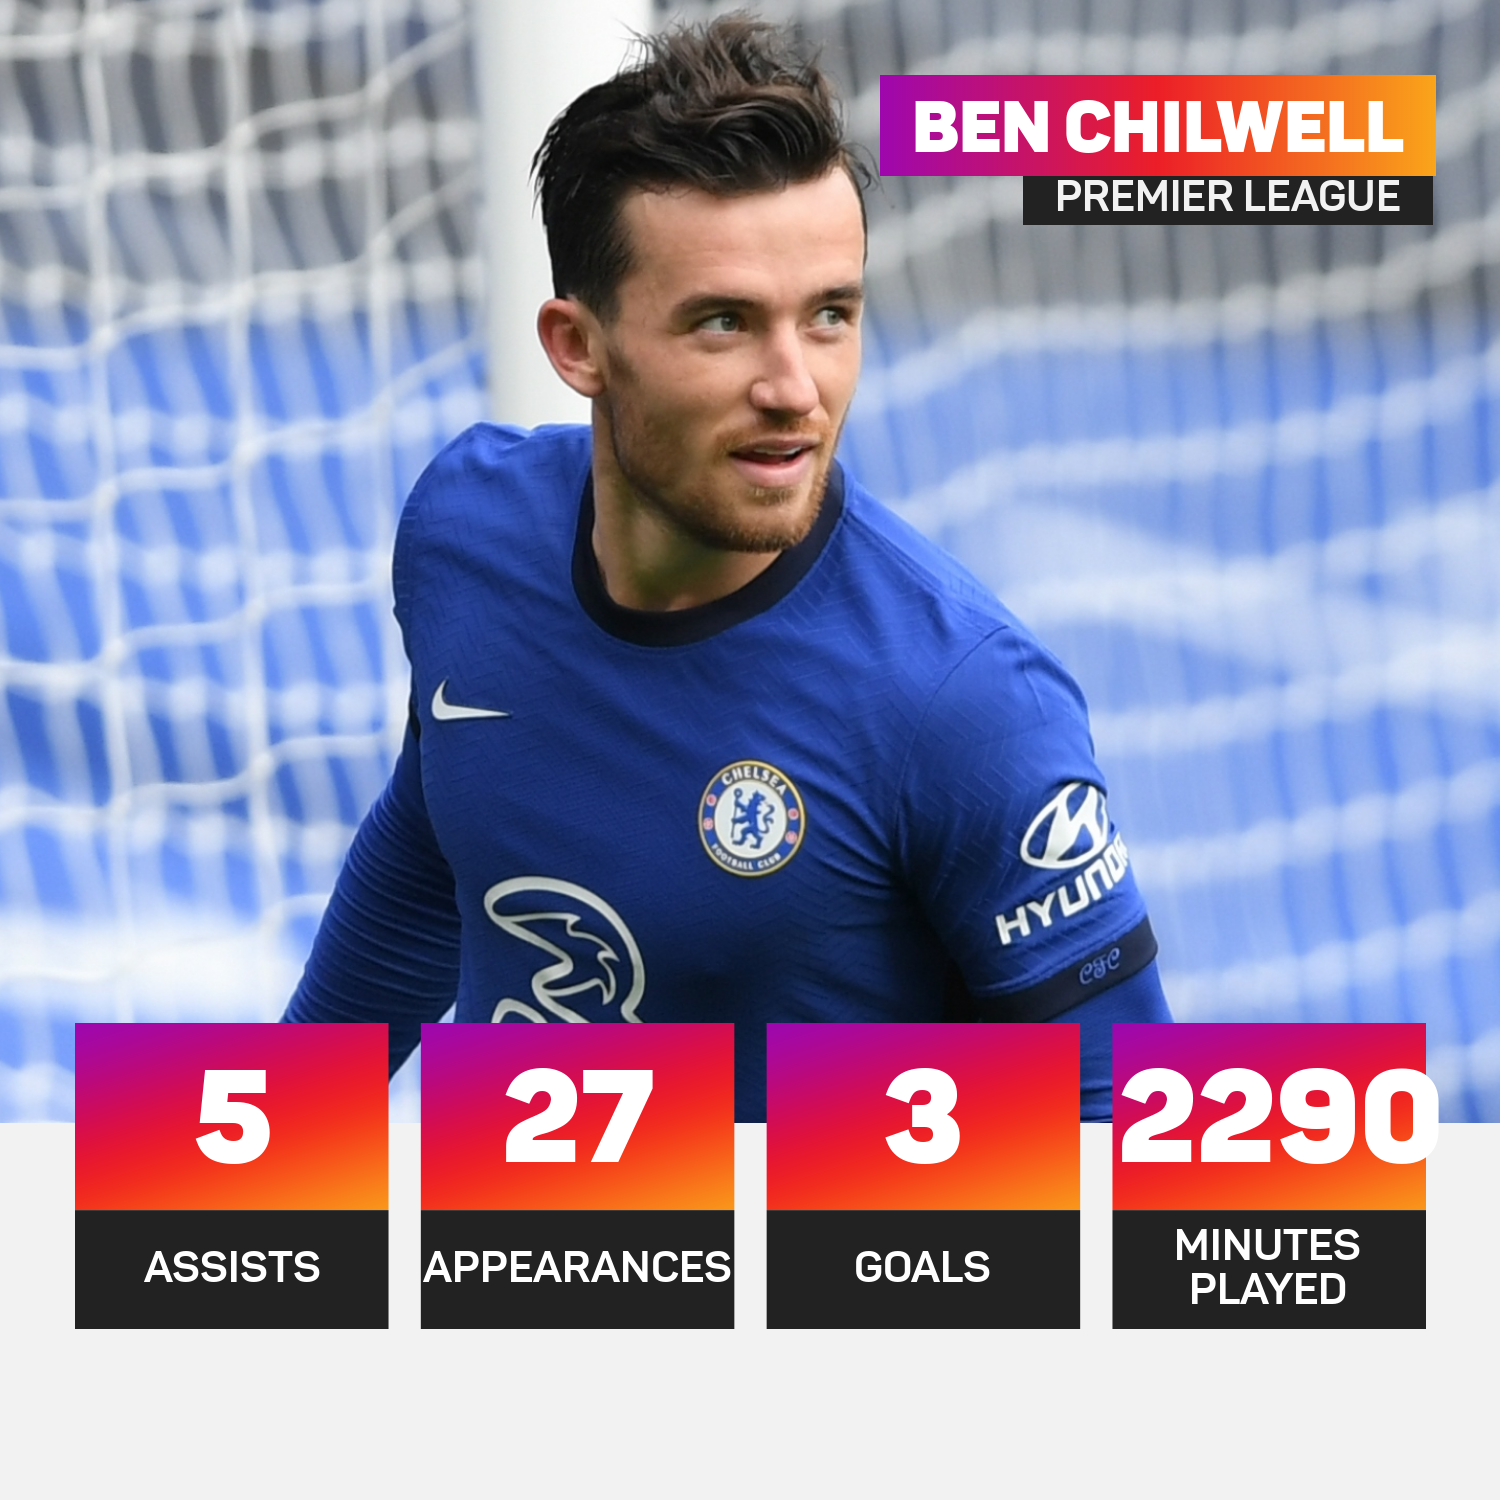 Ben Chilwell for Chelsea in the Premier League